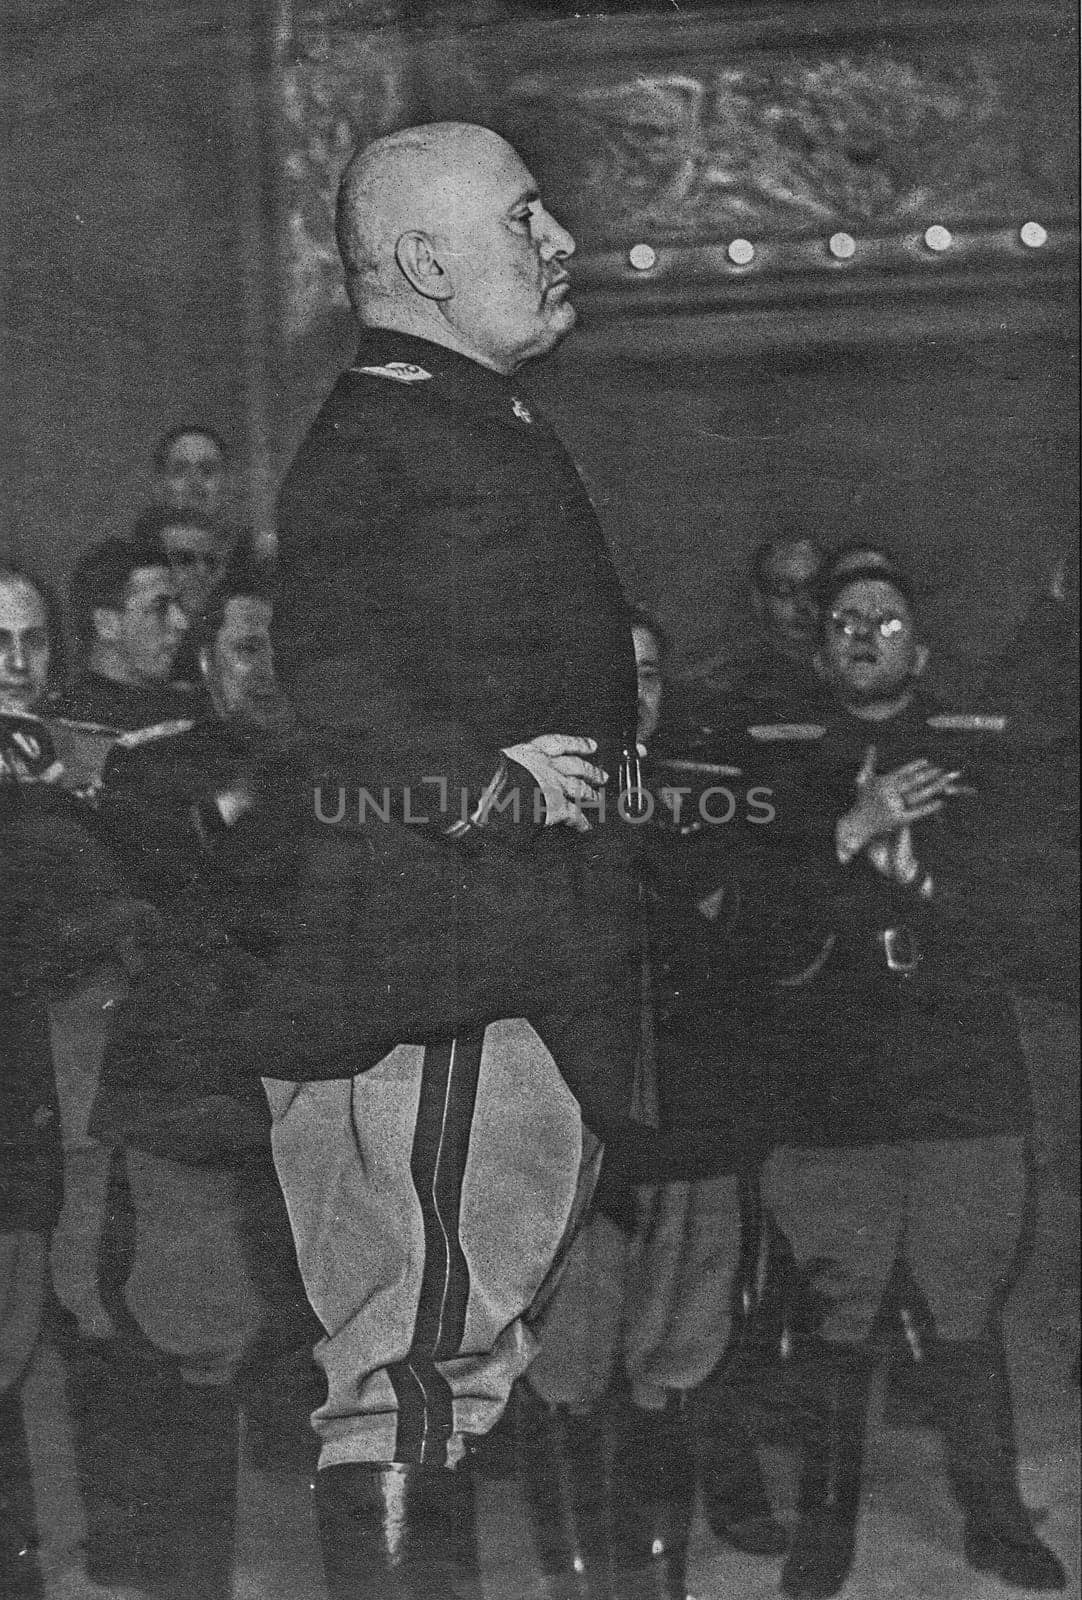 ROME, ITALY - 1940s: Benito Mussolini-Duce. Benito Amilcare Andrea Mussolini (29 July 1883 28 April 1945) was an Italian politician and journalist who founded and led the National Fascist Party.